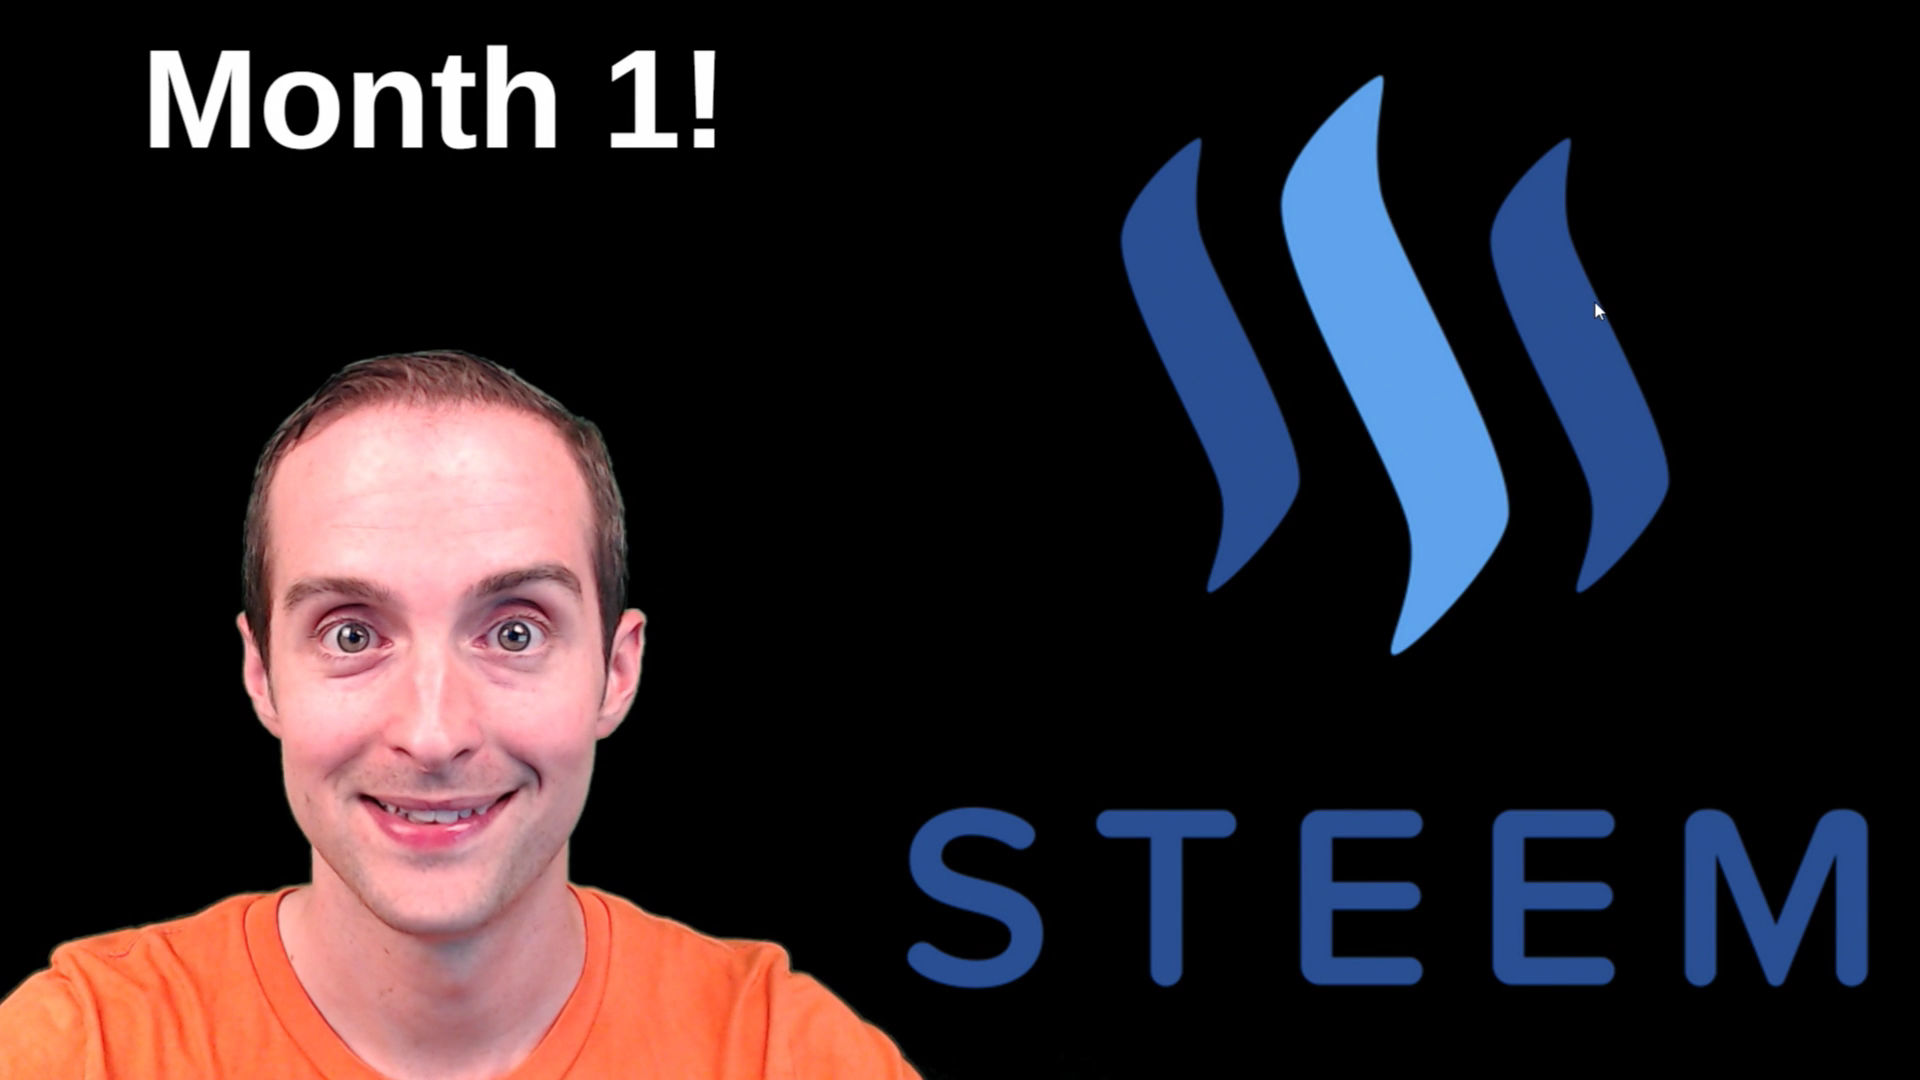 steemit month 1 jerry banfield report.png